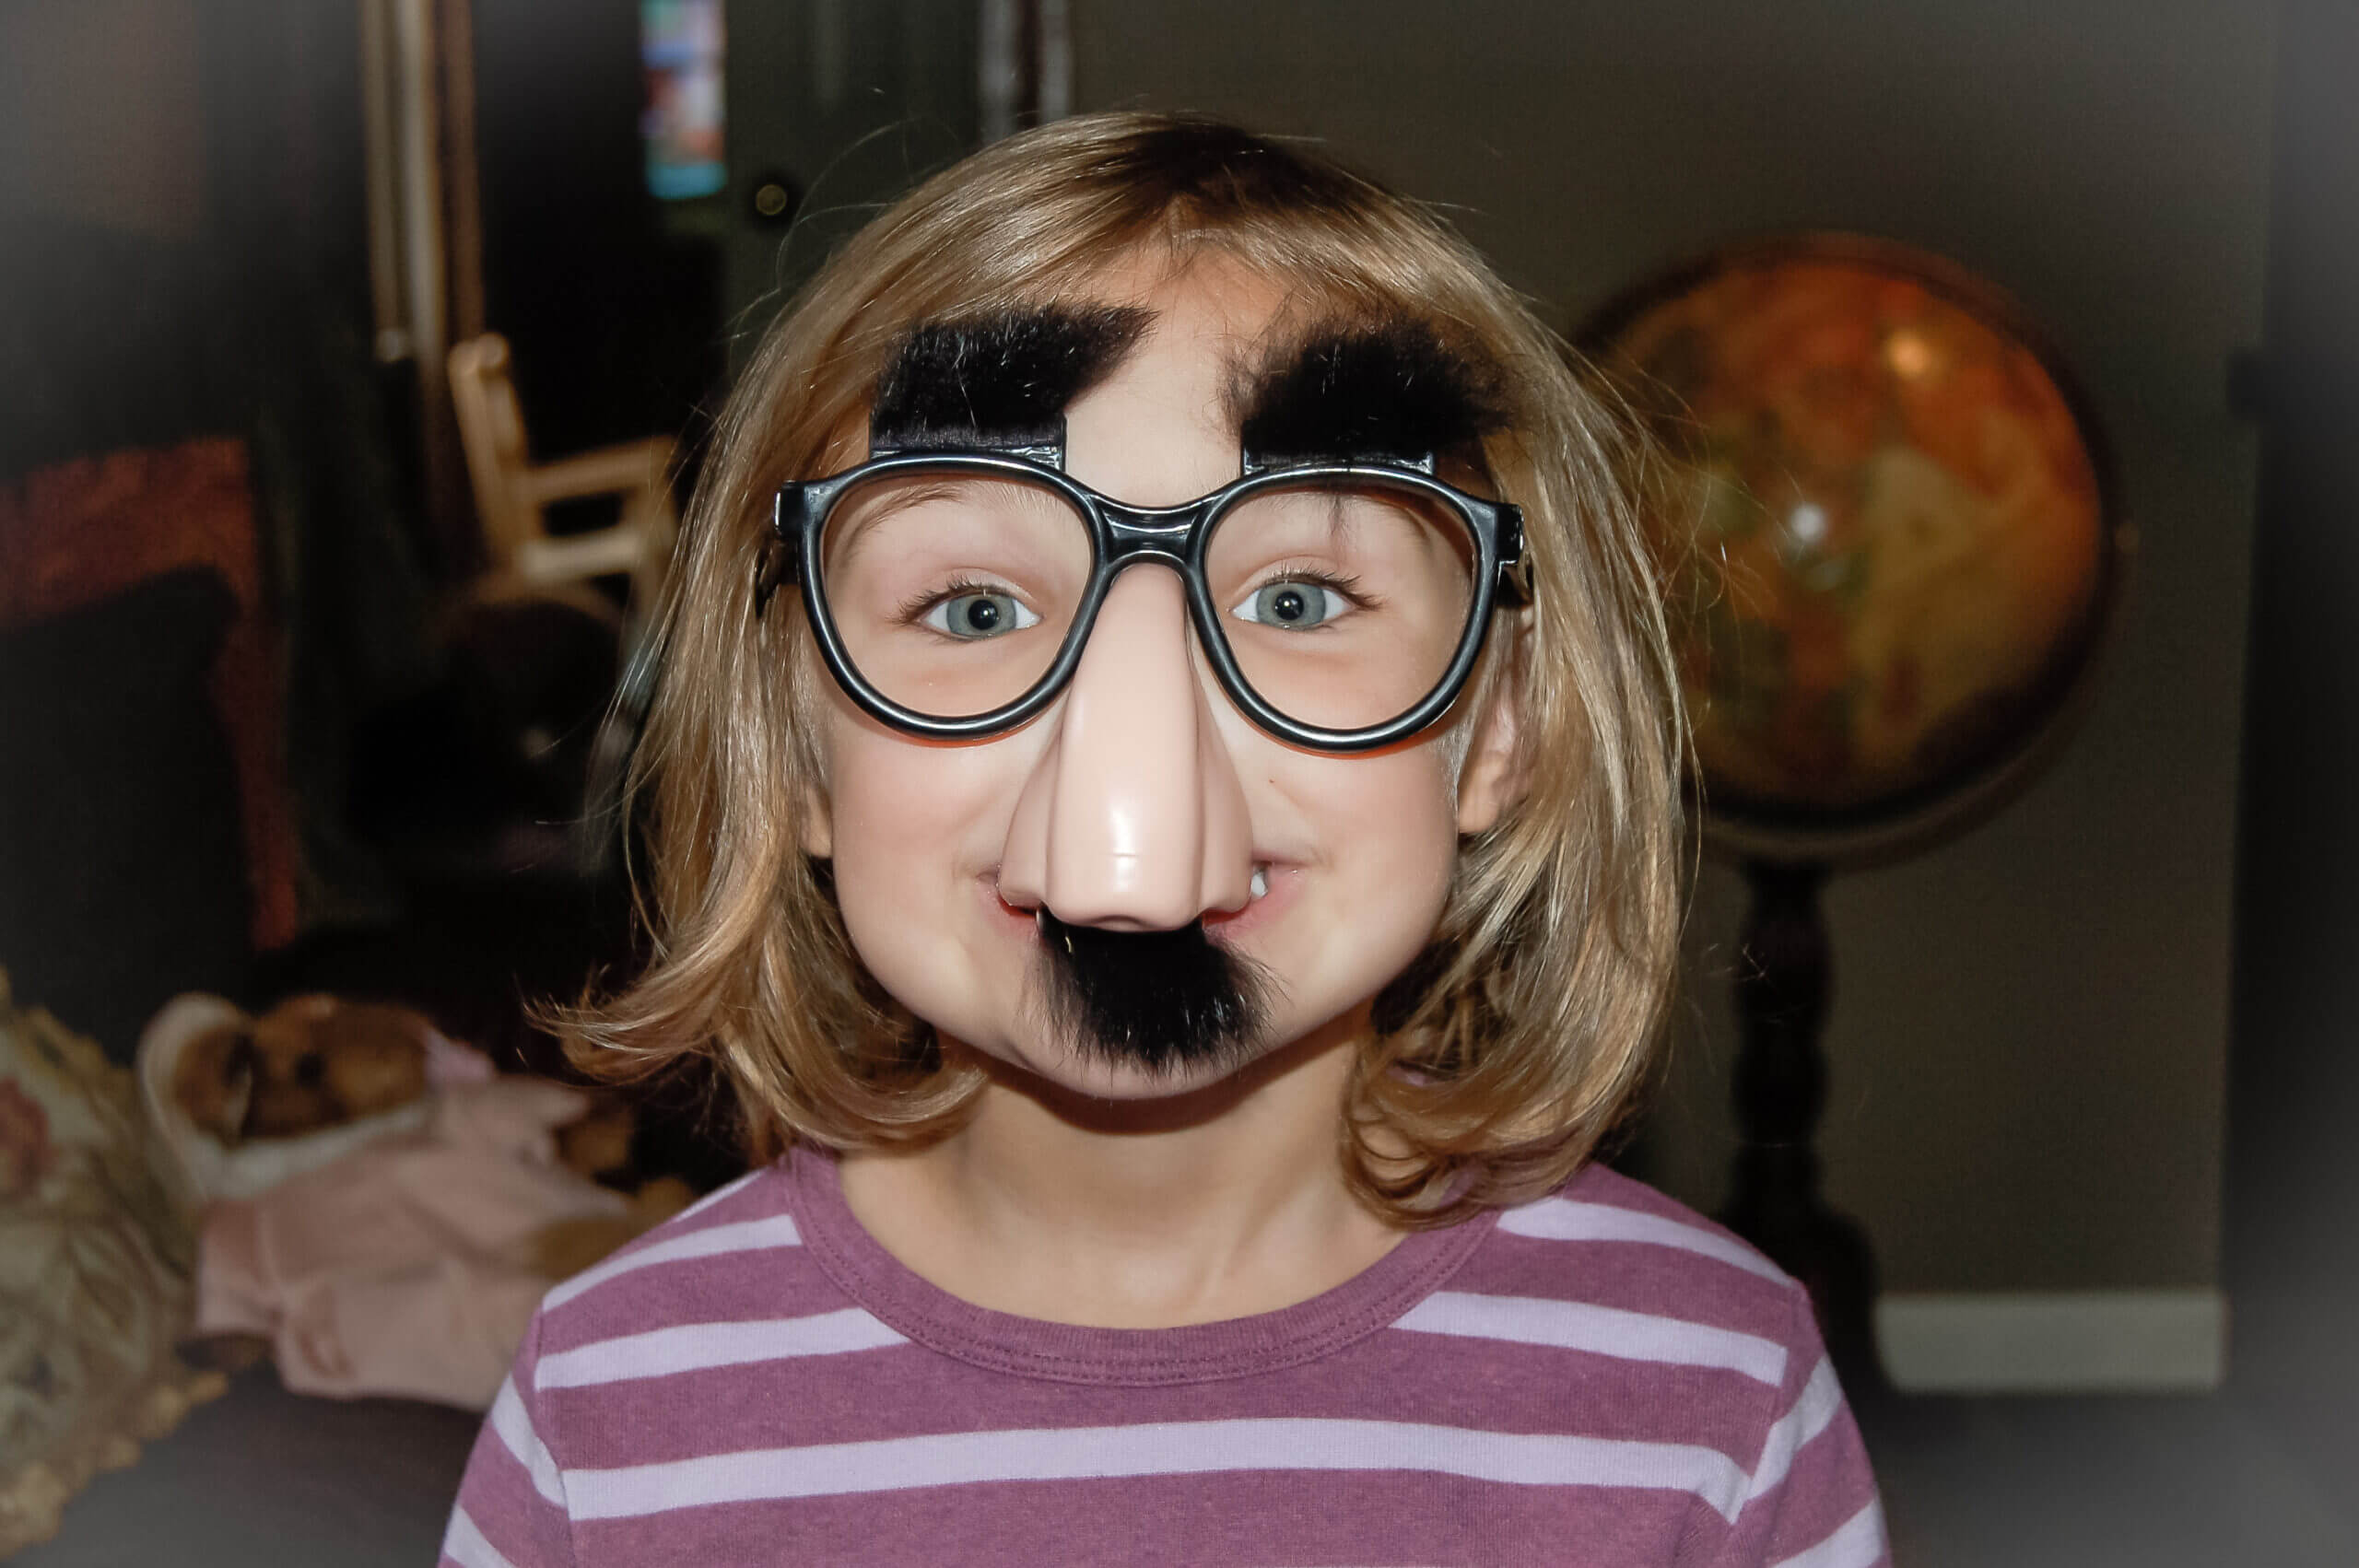 Color photo of a white little girl with a blond bob and Groucho Marx glasses on. The little girl has blue eyes and is smiling behind the big nose and fake moustache.